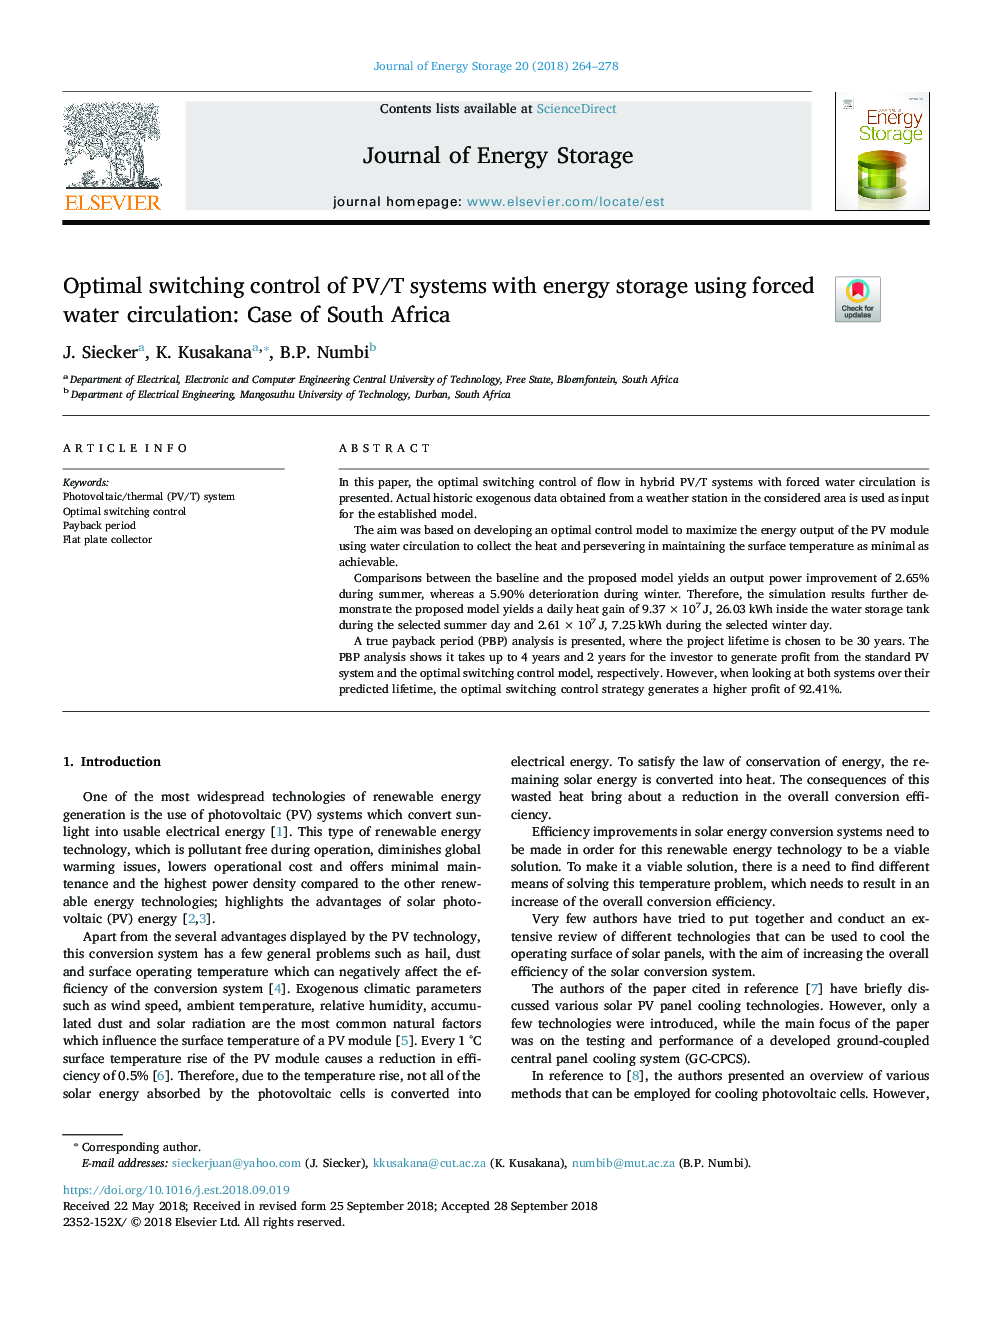 Optimal switching control of PV/T systems with energy storage using forced water circulation: Case of South Africa